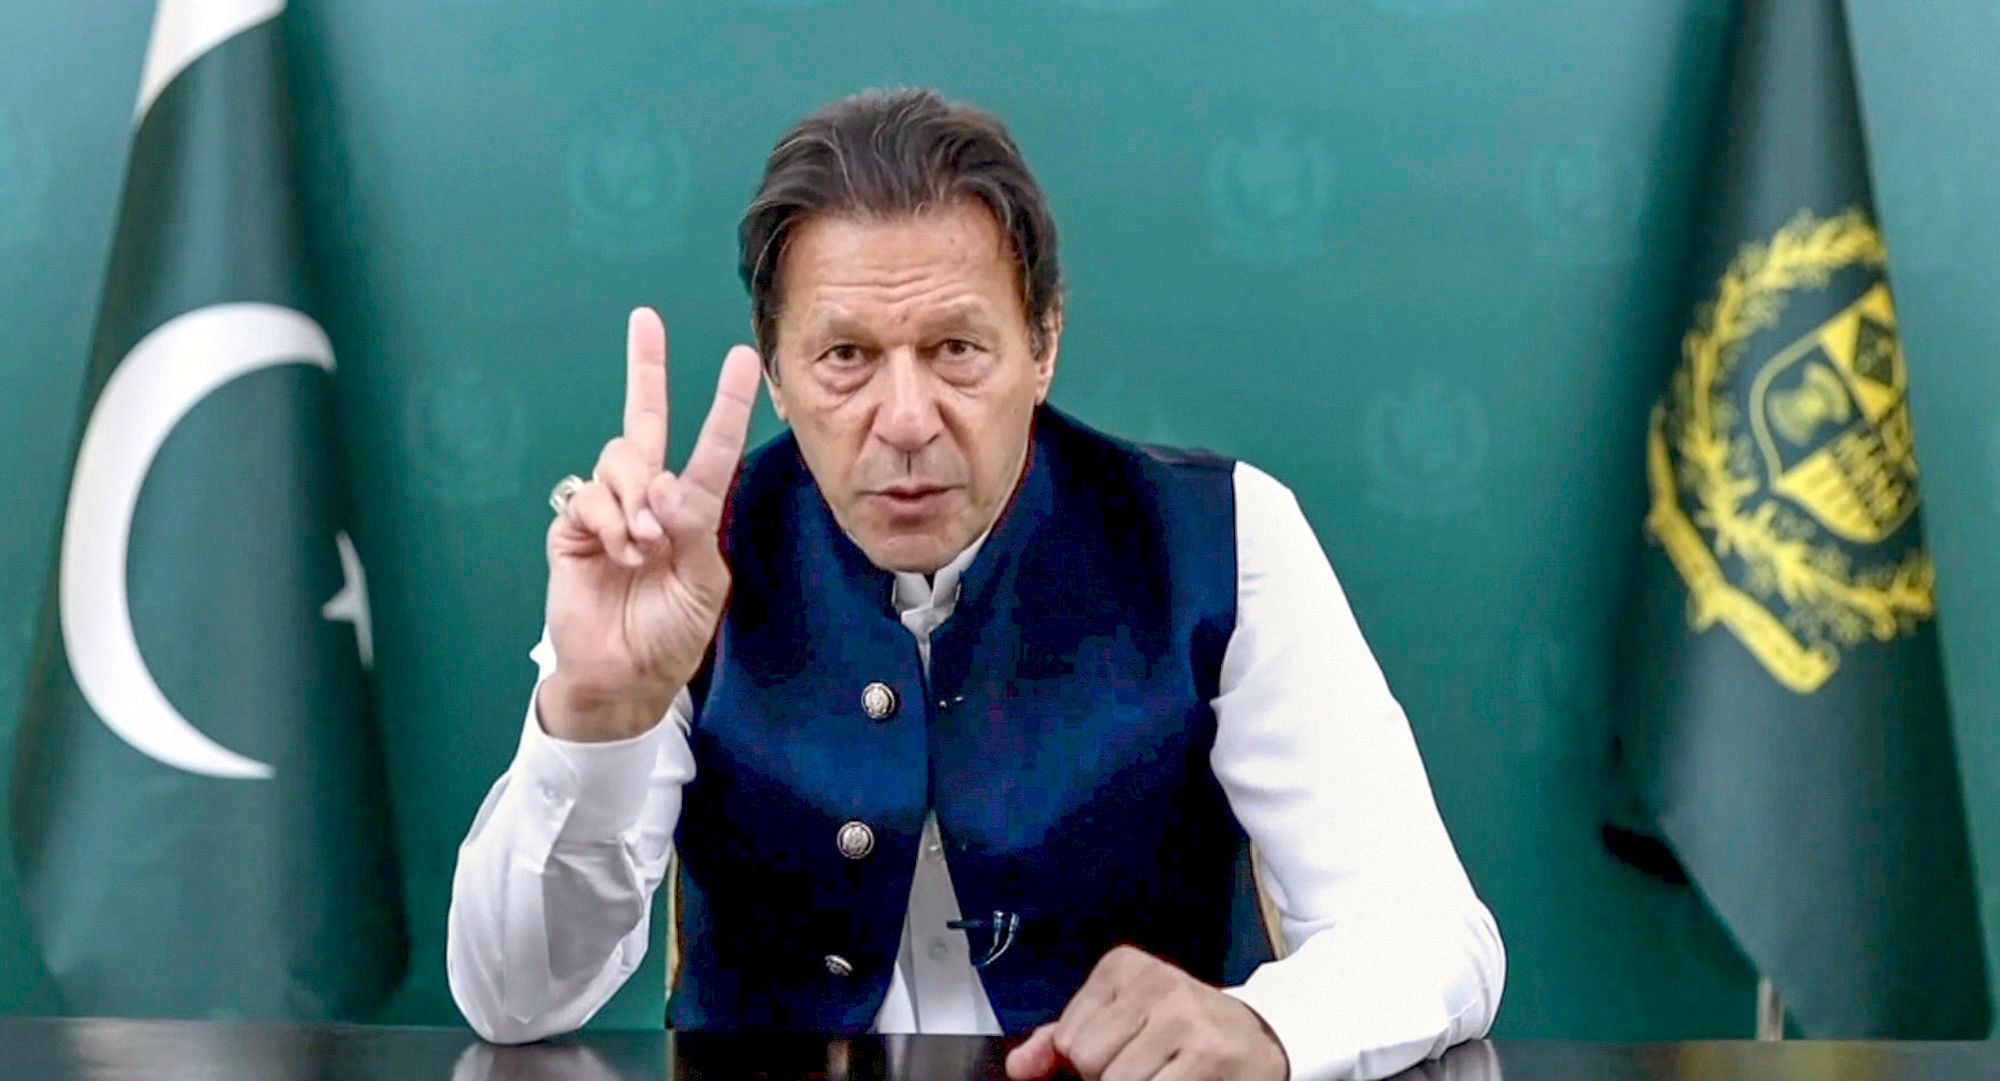 Why is Imran Khan being slammed for his Mujahideen remarks at UNGA